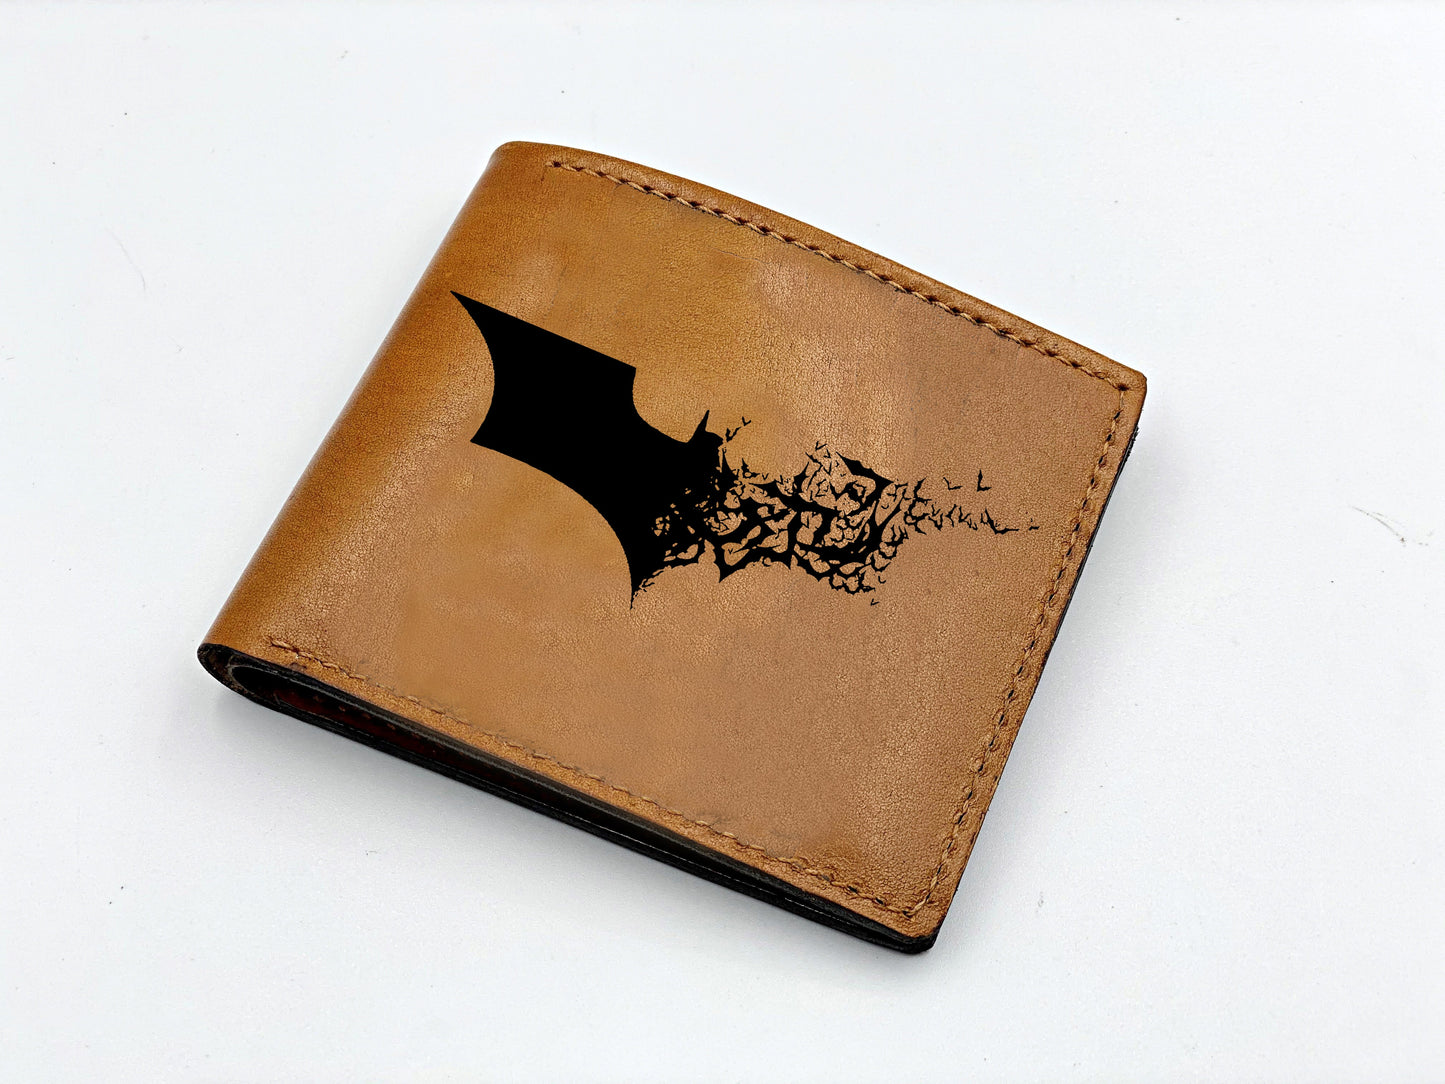 Mayan Corner - Personalized leather handmade wallet, superheroes leather gift for him, batman leather wallet, batman gift for dad, cool leather anniversary present